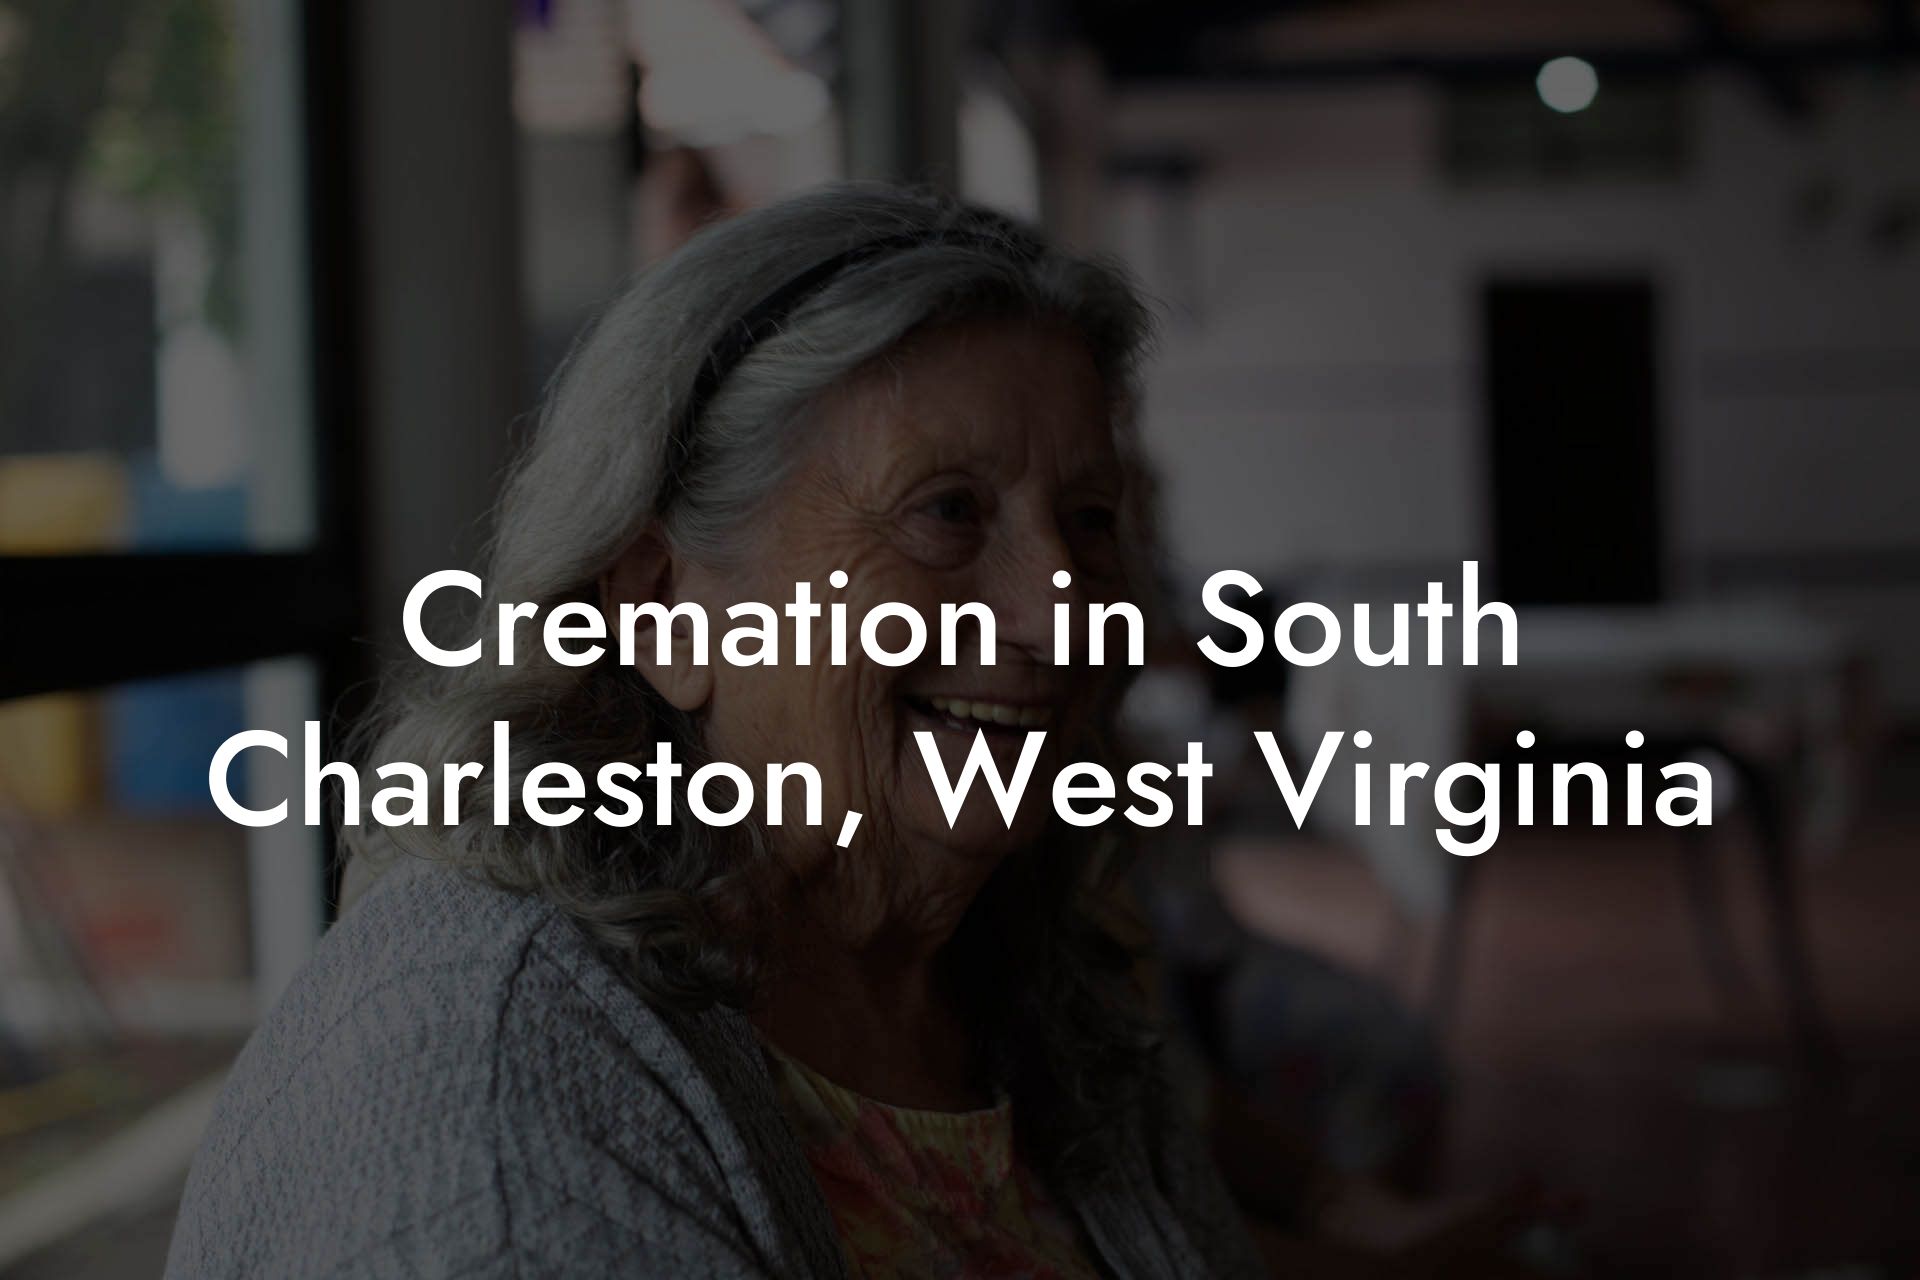 Cremation in South Charleston, West Virginia